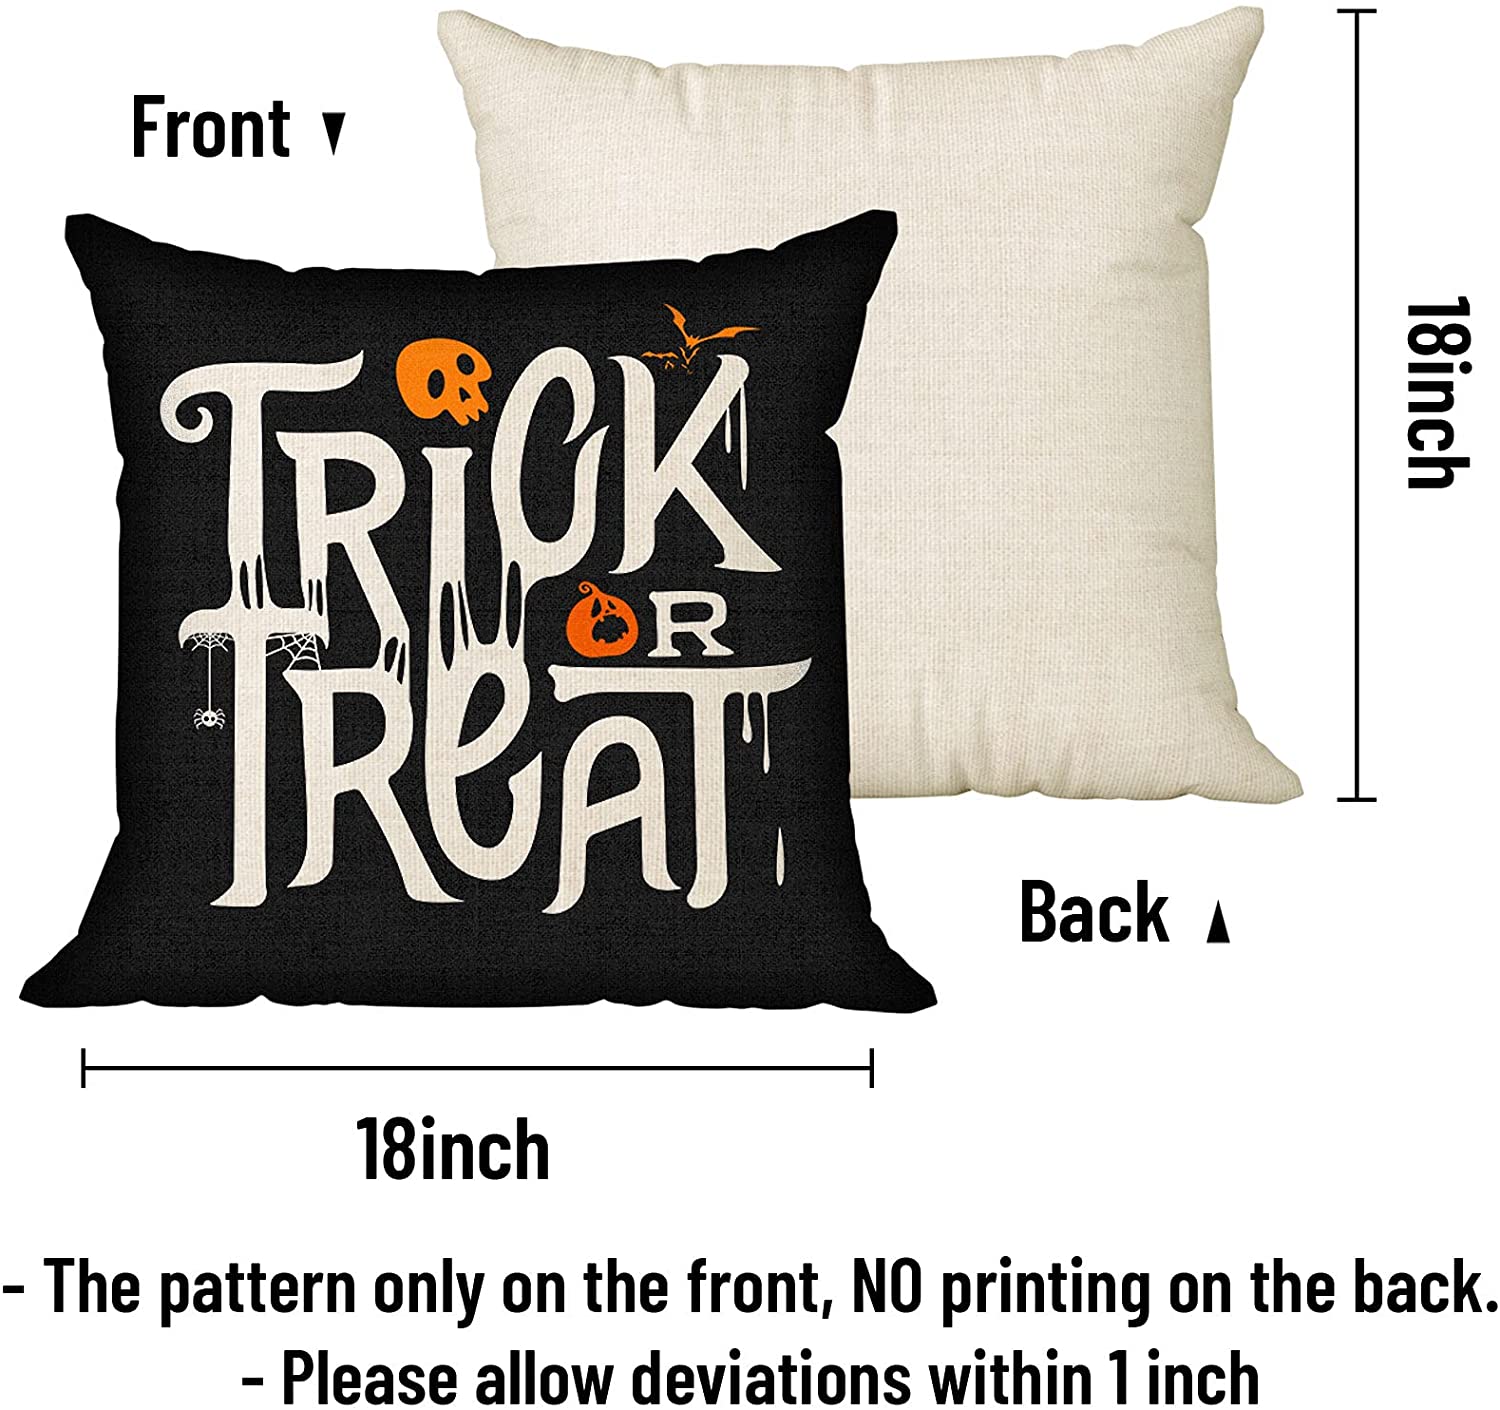 Set of 4 Halloween Trick or Treat Pillow Covers 18 x 18 with 4